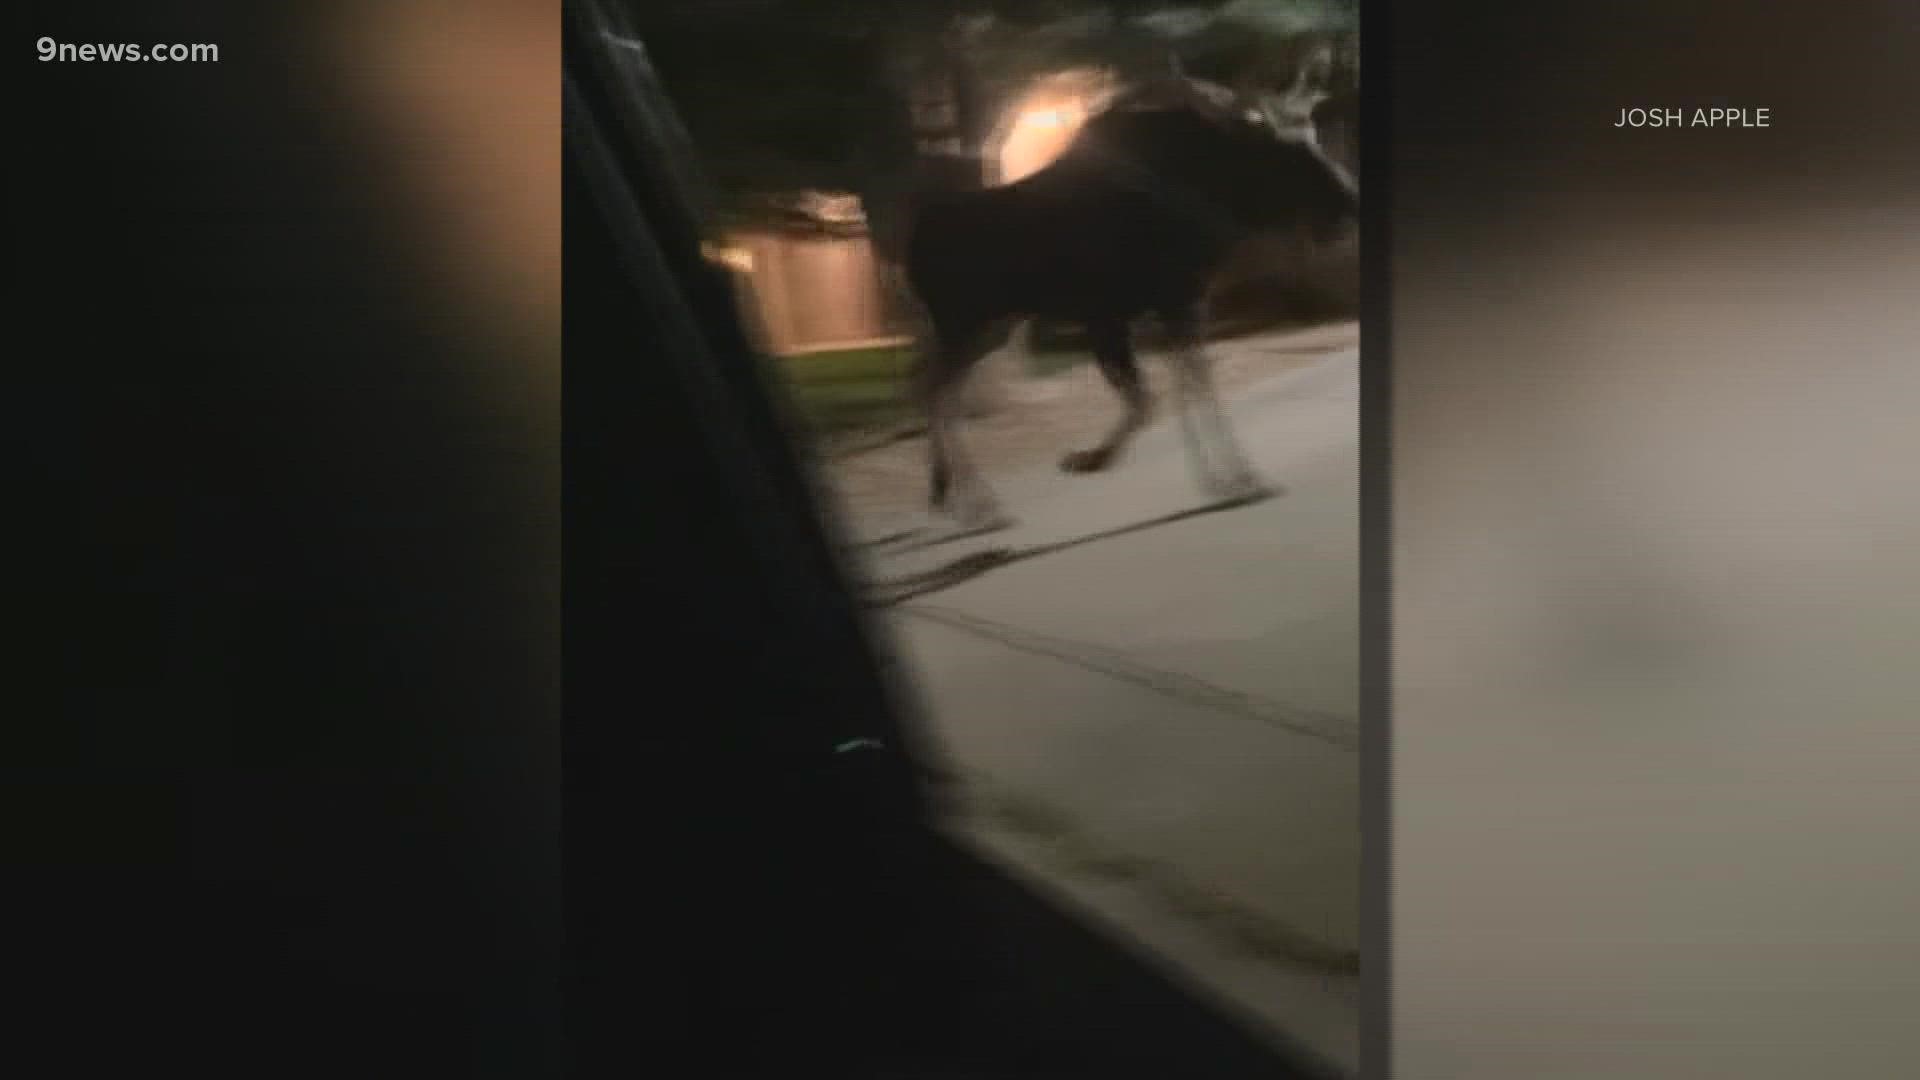 Van Bibber Park was closed Wednesday evening while Colorado Parks and Wildlife officials monitored the moose, which was also spotted in surrounding neighborhoods.